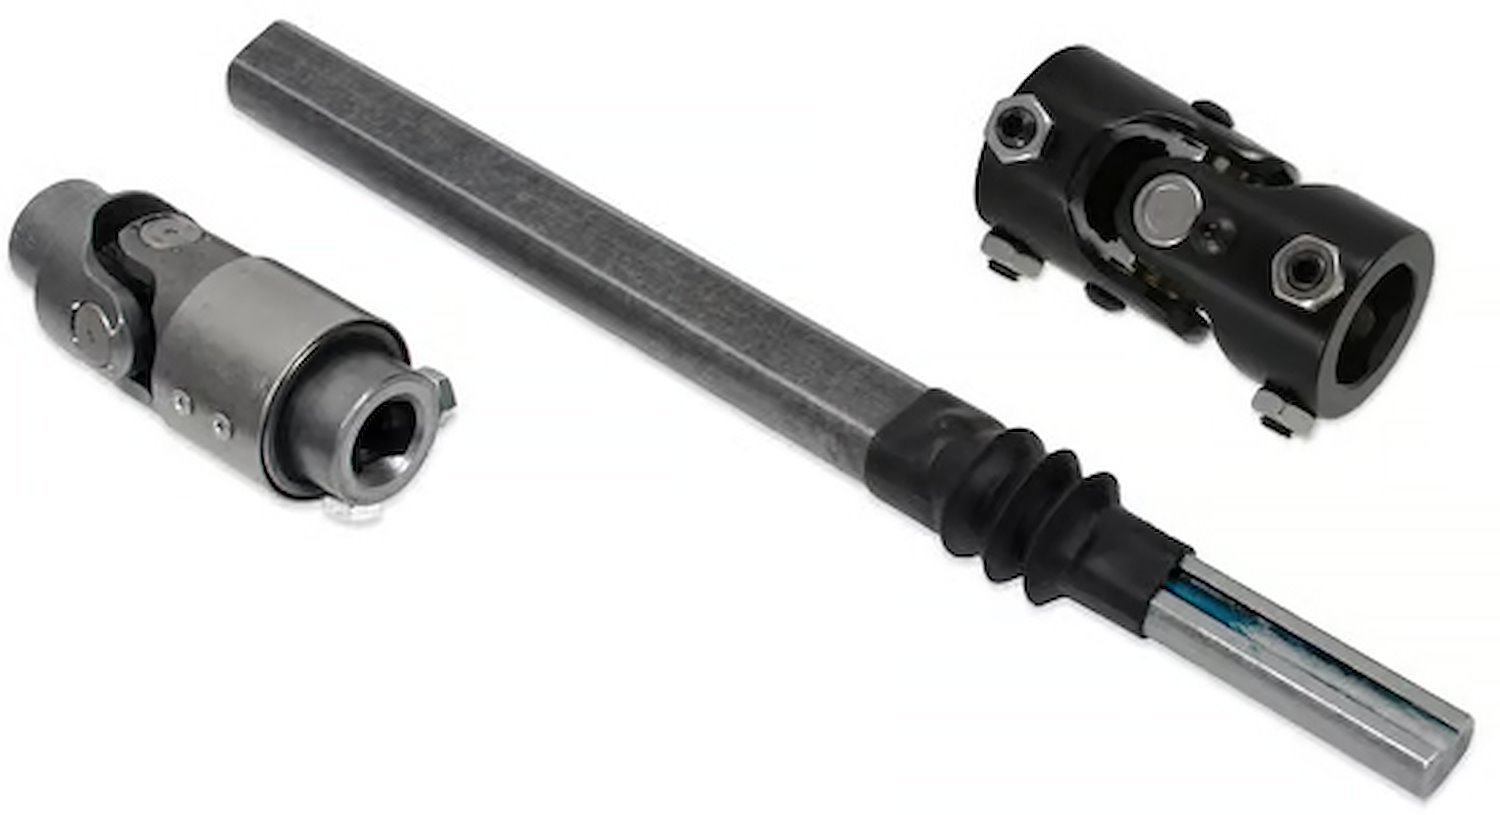 092541DS Steering Shaft Kit with Vibration Reducer for 1979-1987 GM C10, GMC C15 Trucks for Stock Column to DSE Gear